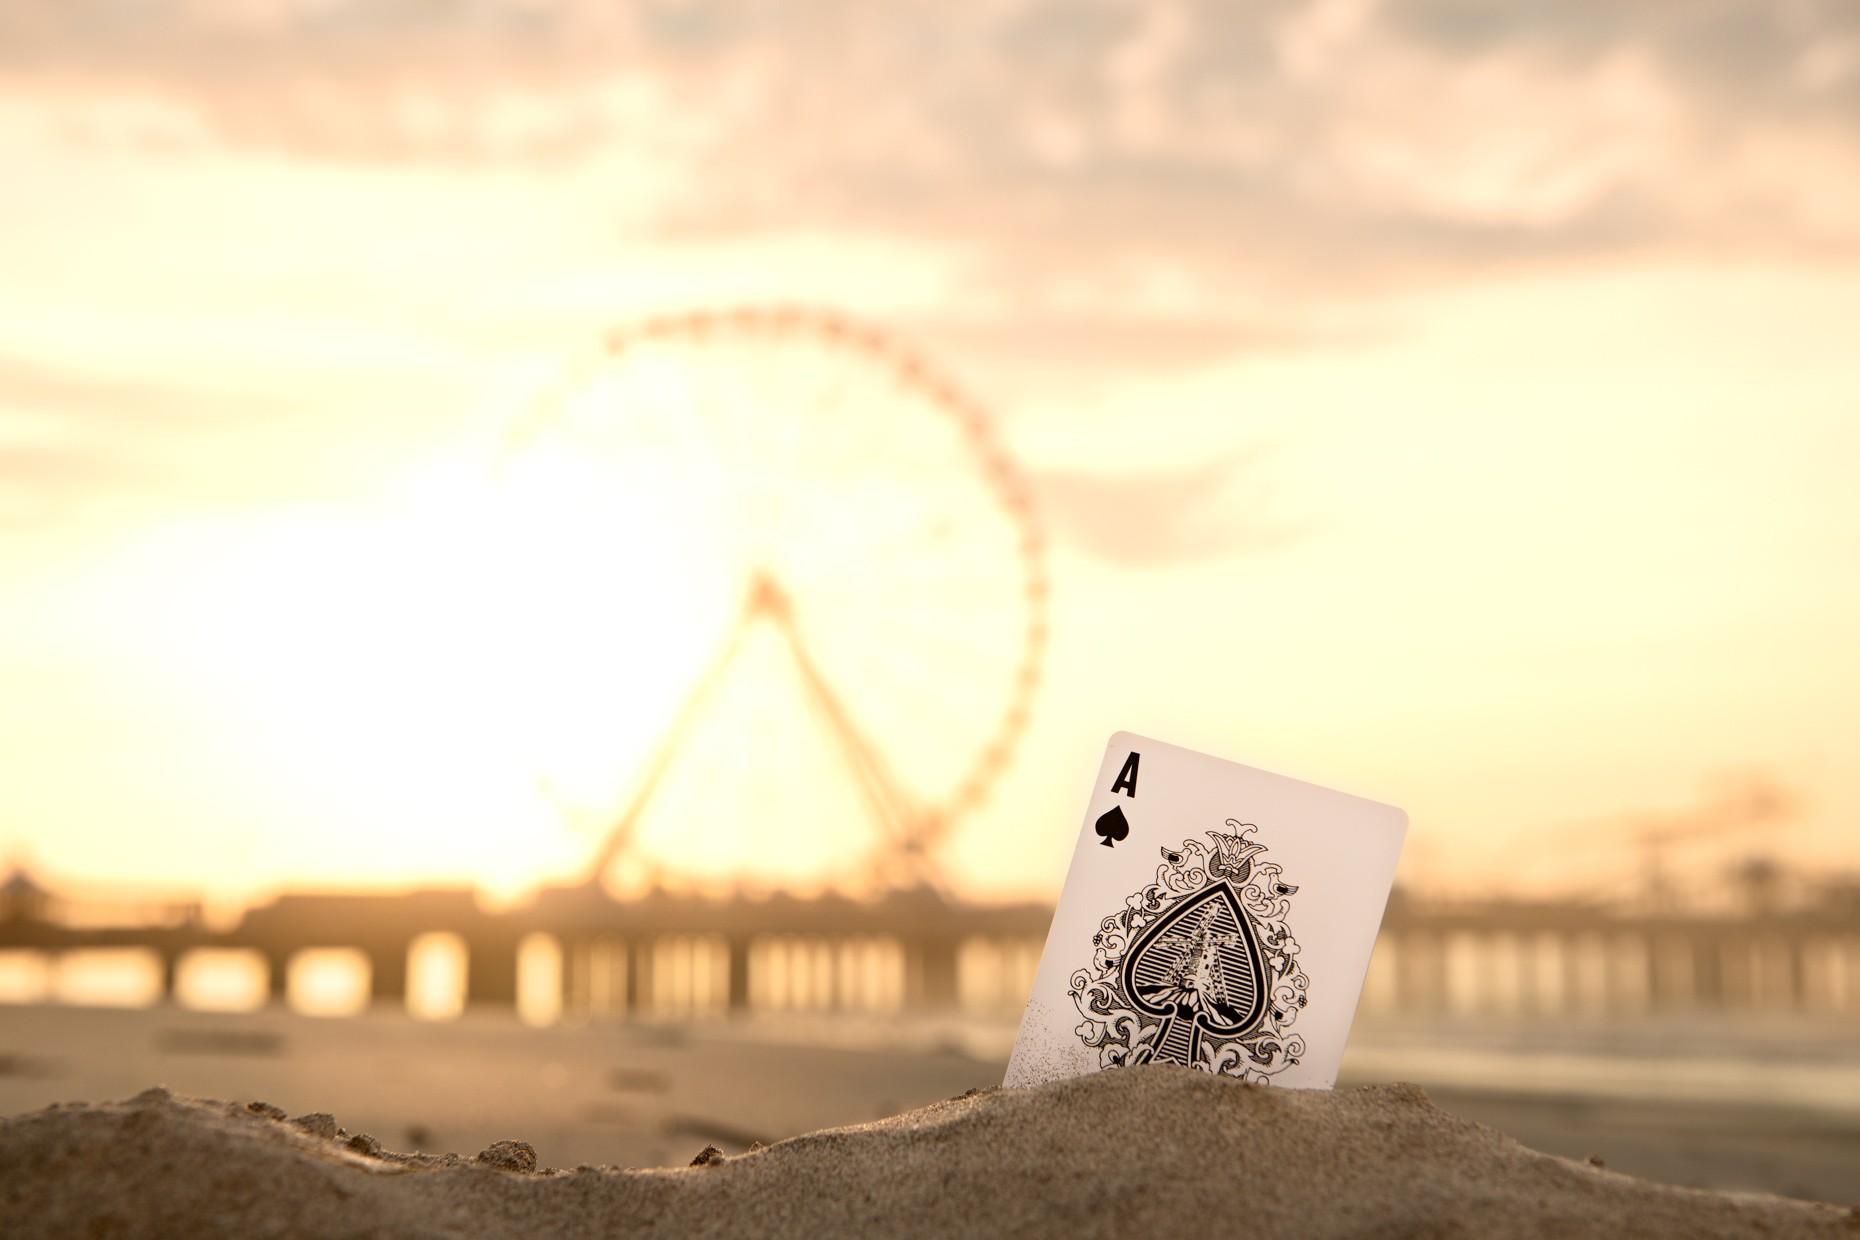 James Woodley Photography Scene Setting Playing Card at Atlantic City Boardwalk for Hard Rock Hotel and Casino